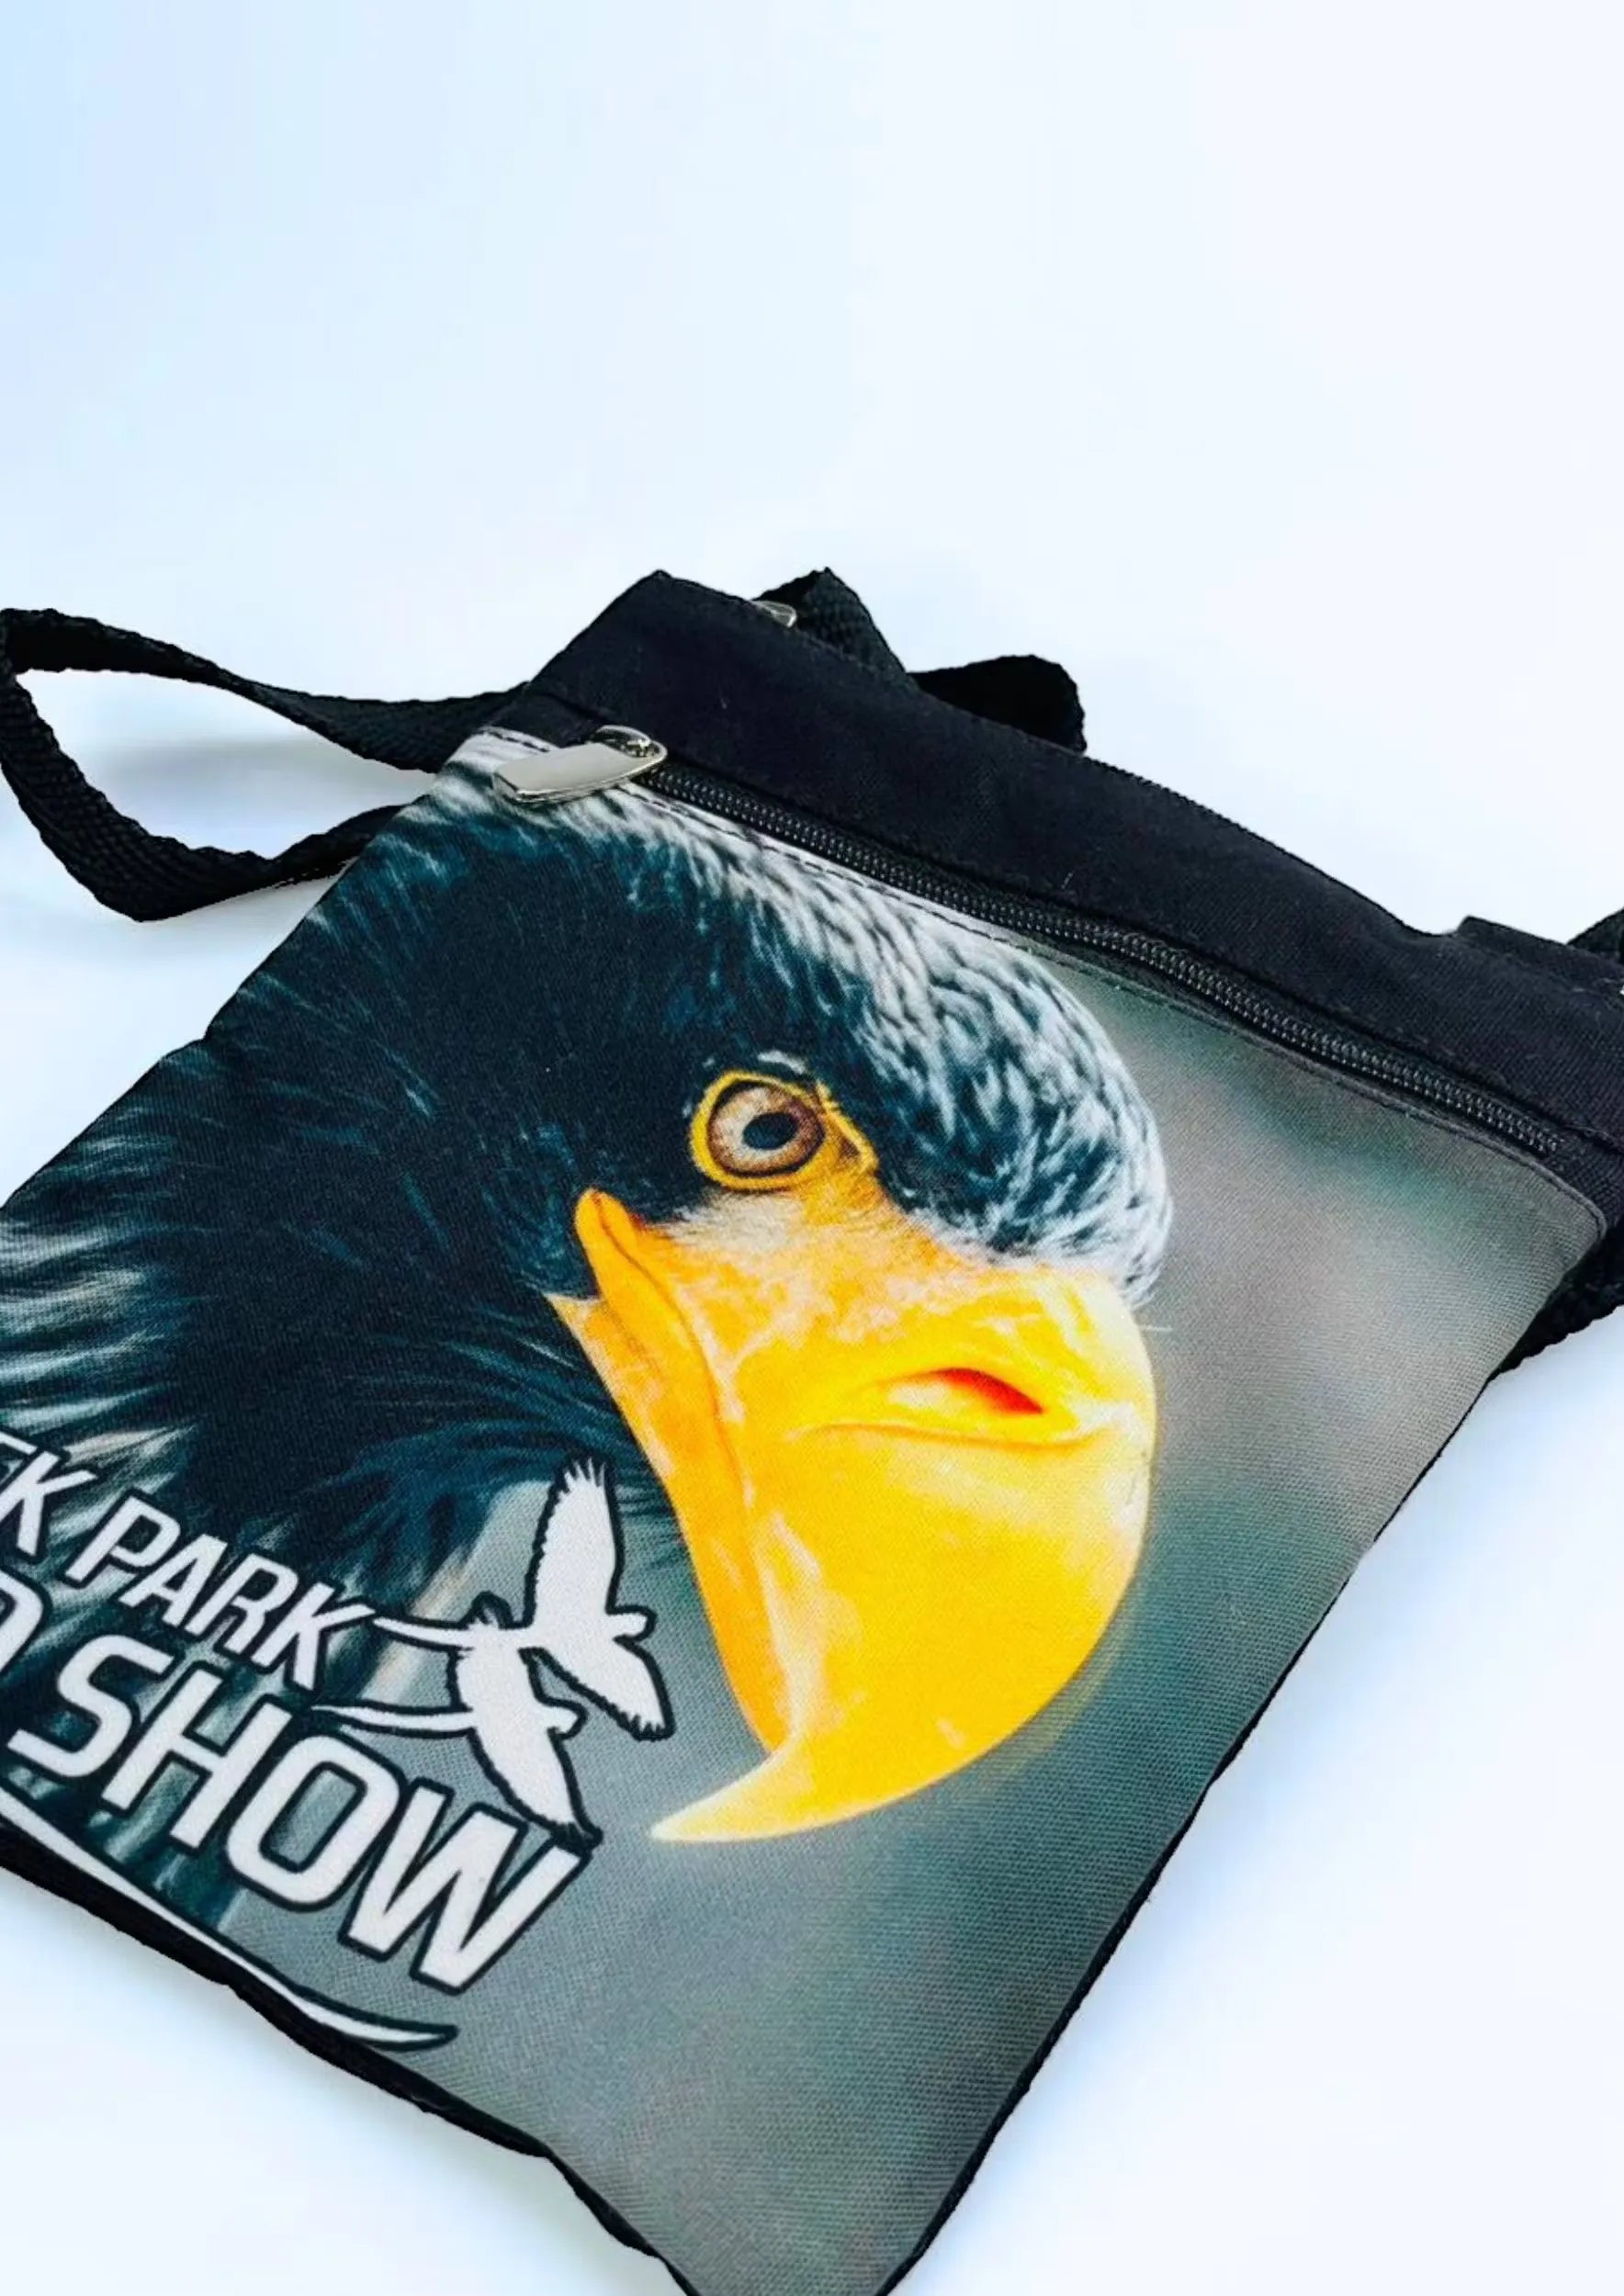 A stylish Creek Park Bird Show side bag with a black exterior and cloths straps. The bag has multiple compartments and pockets for storing essentials.